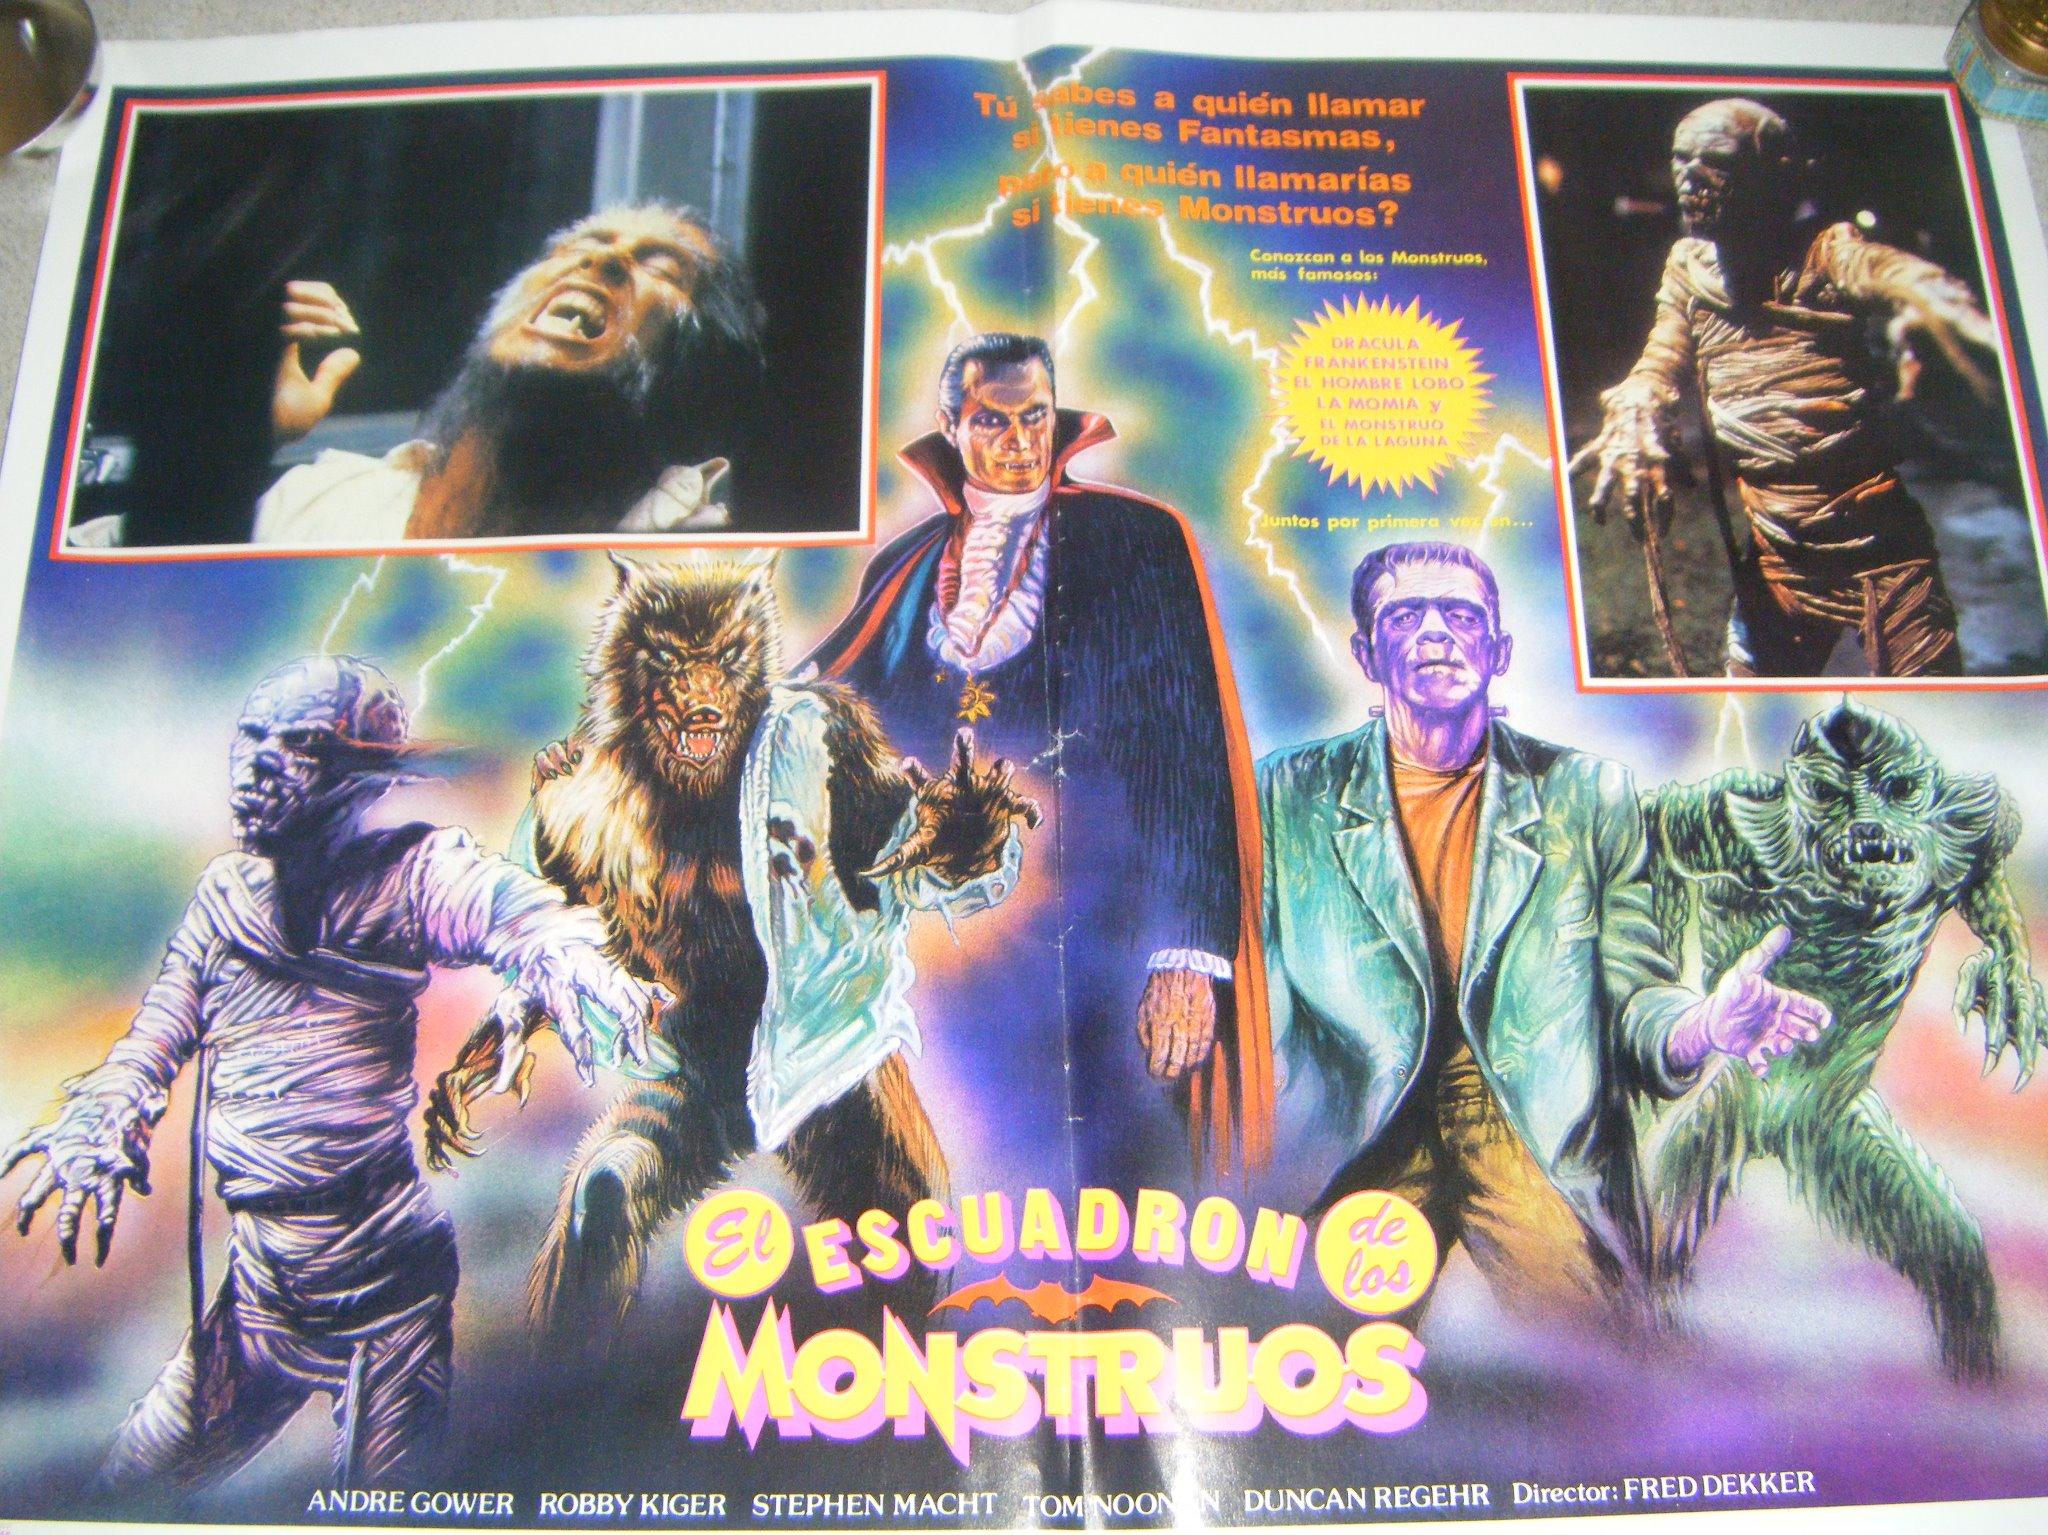 The Monster Squad Poster I Got On Havn T Seen One Like It